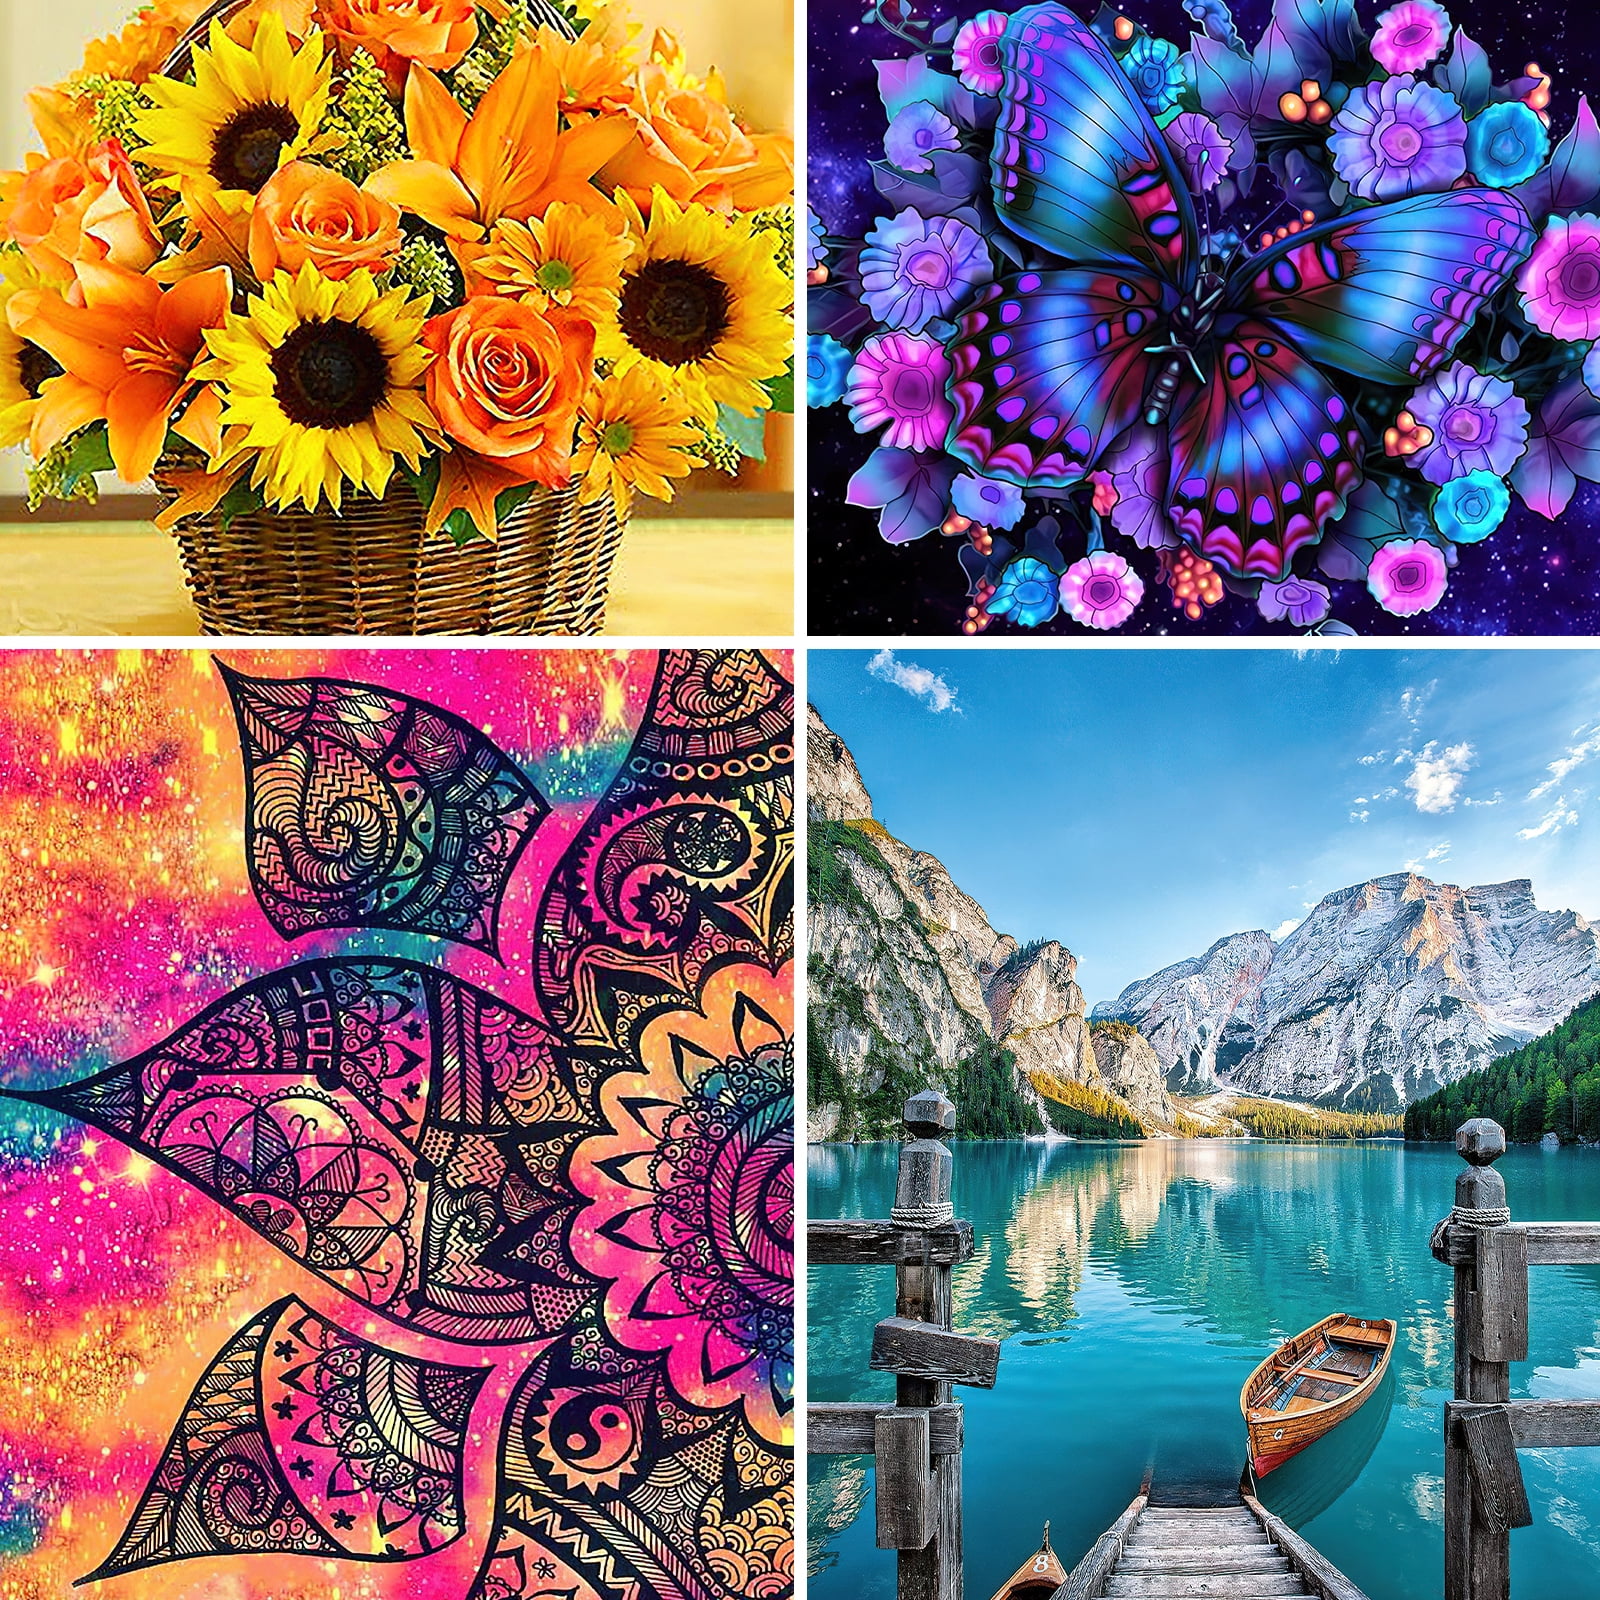  NAIMOER Flowers Diamond Painting Kits for Adults - Full Drill  Bike Diamond Painting DIY 5D Diamond Painting Flower Baskets & Butterflies  Diamond Art Kits Spring Crystal Craft for Home Wall 30x40cm